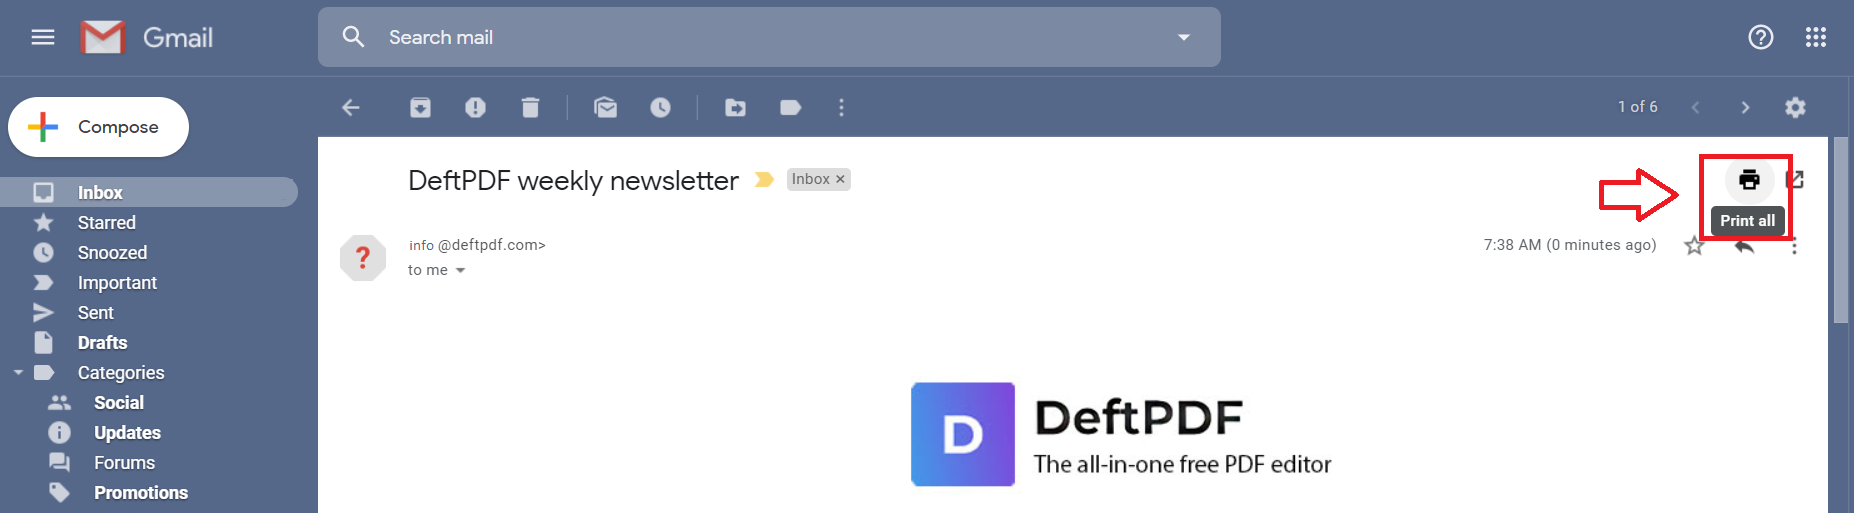 How to Print to PDF with Gmail